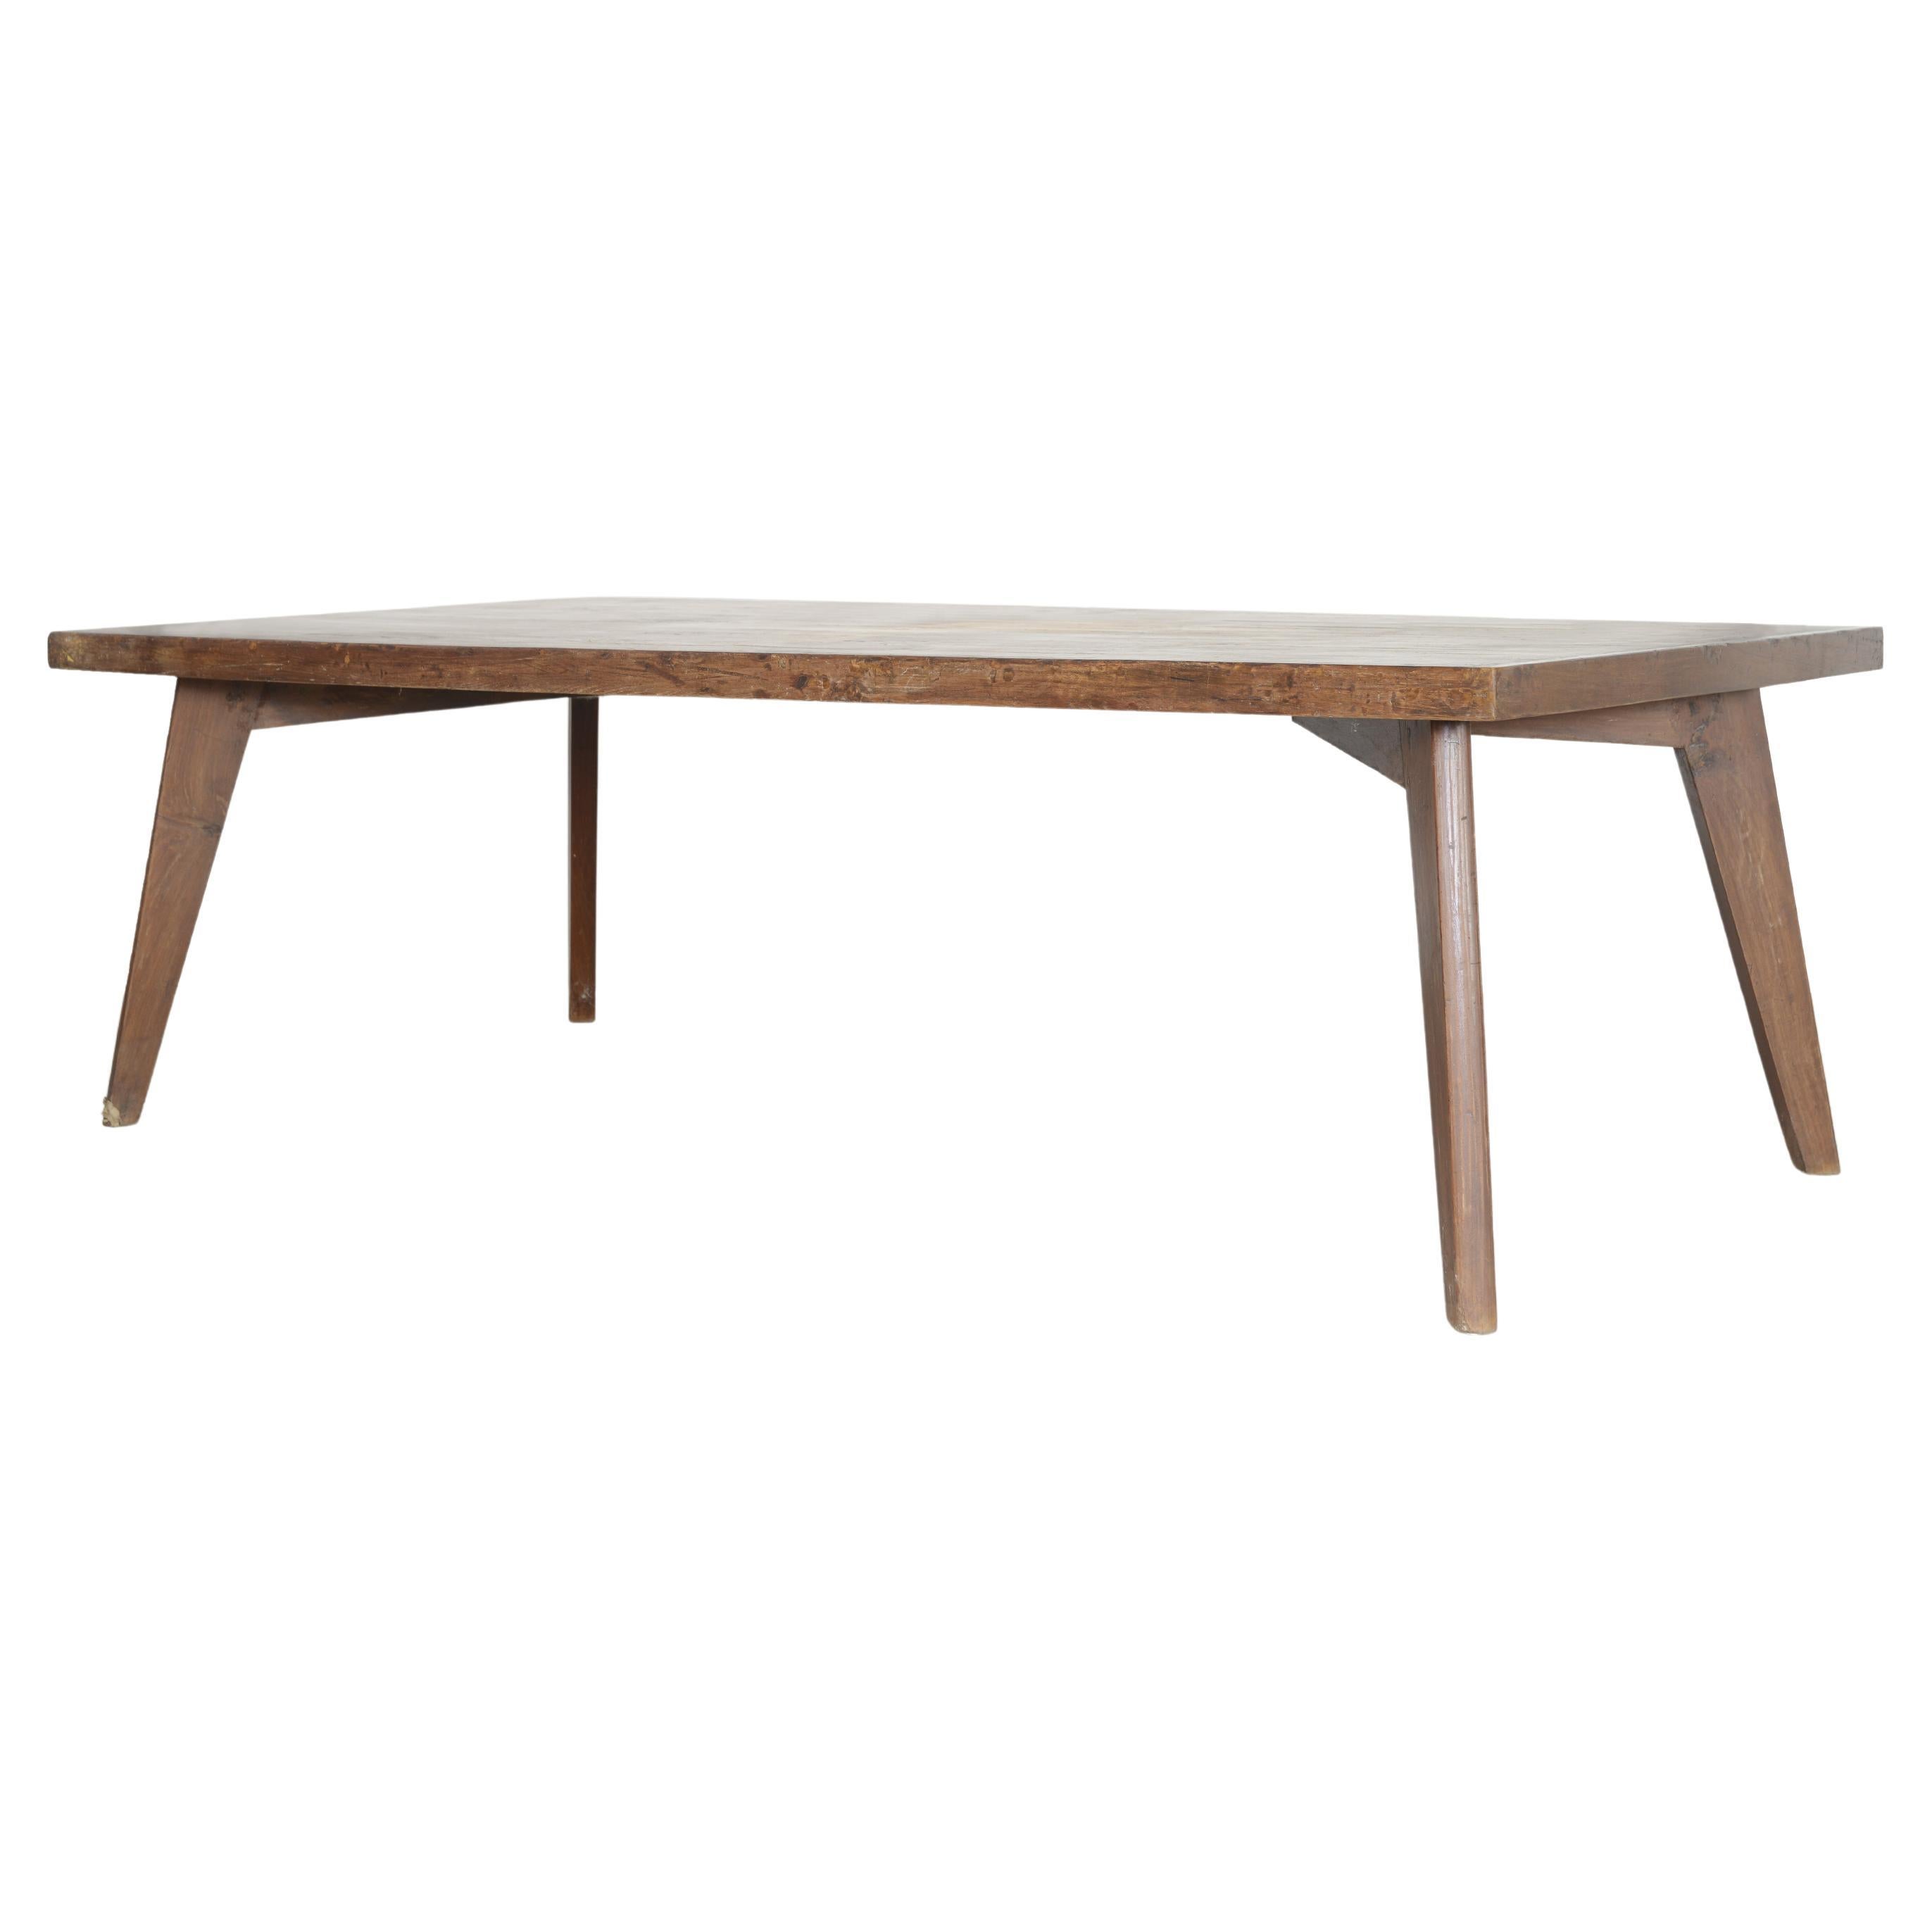 Pierre Jeanneret PJ-TA-01-B Dining Table / Authentic Mid-Century Modern For Sale